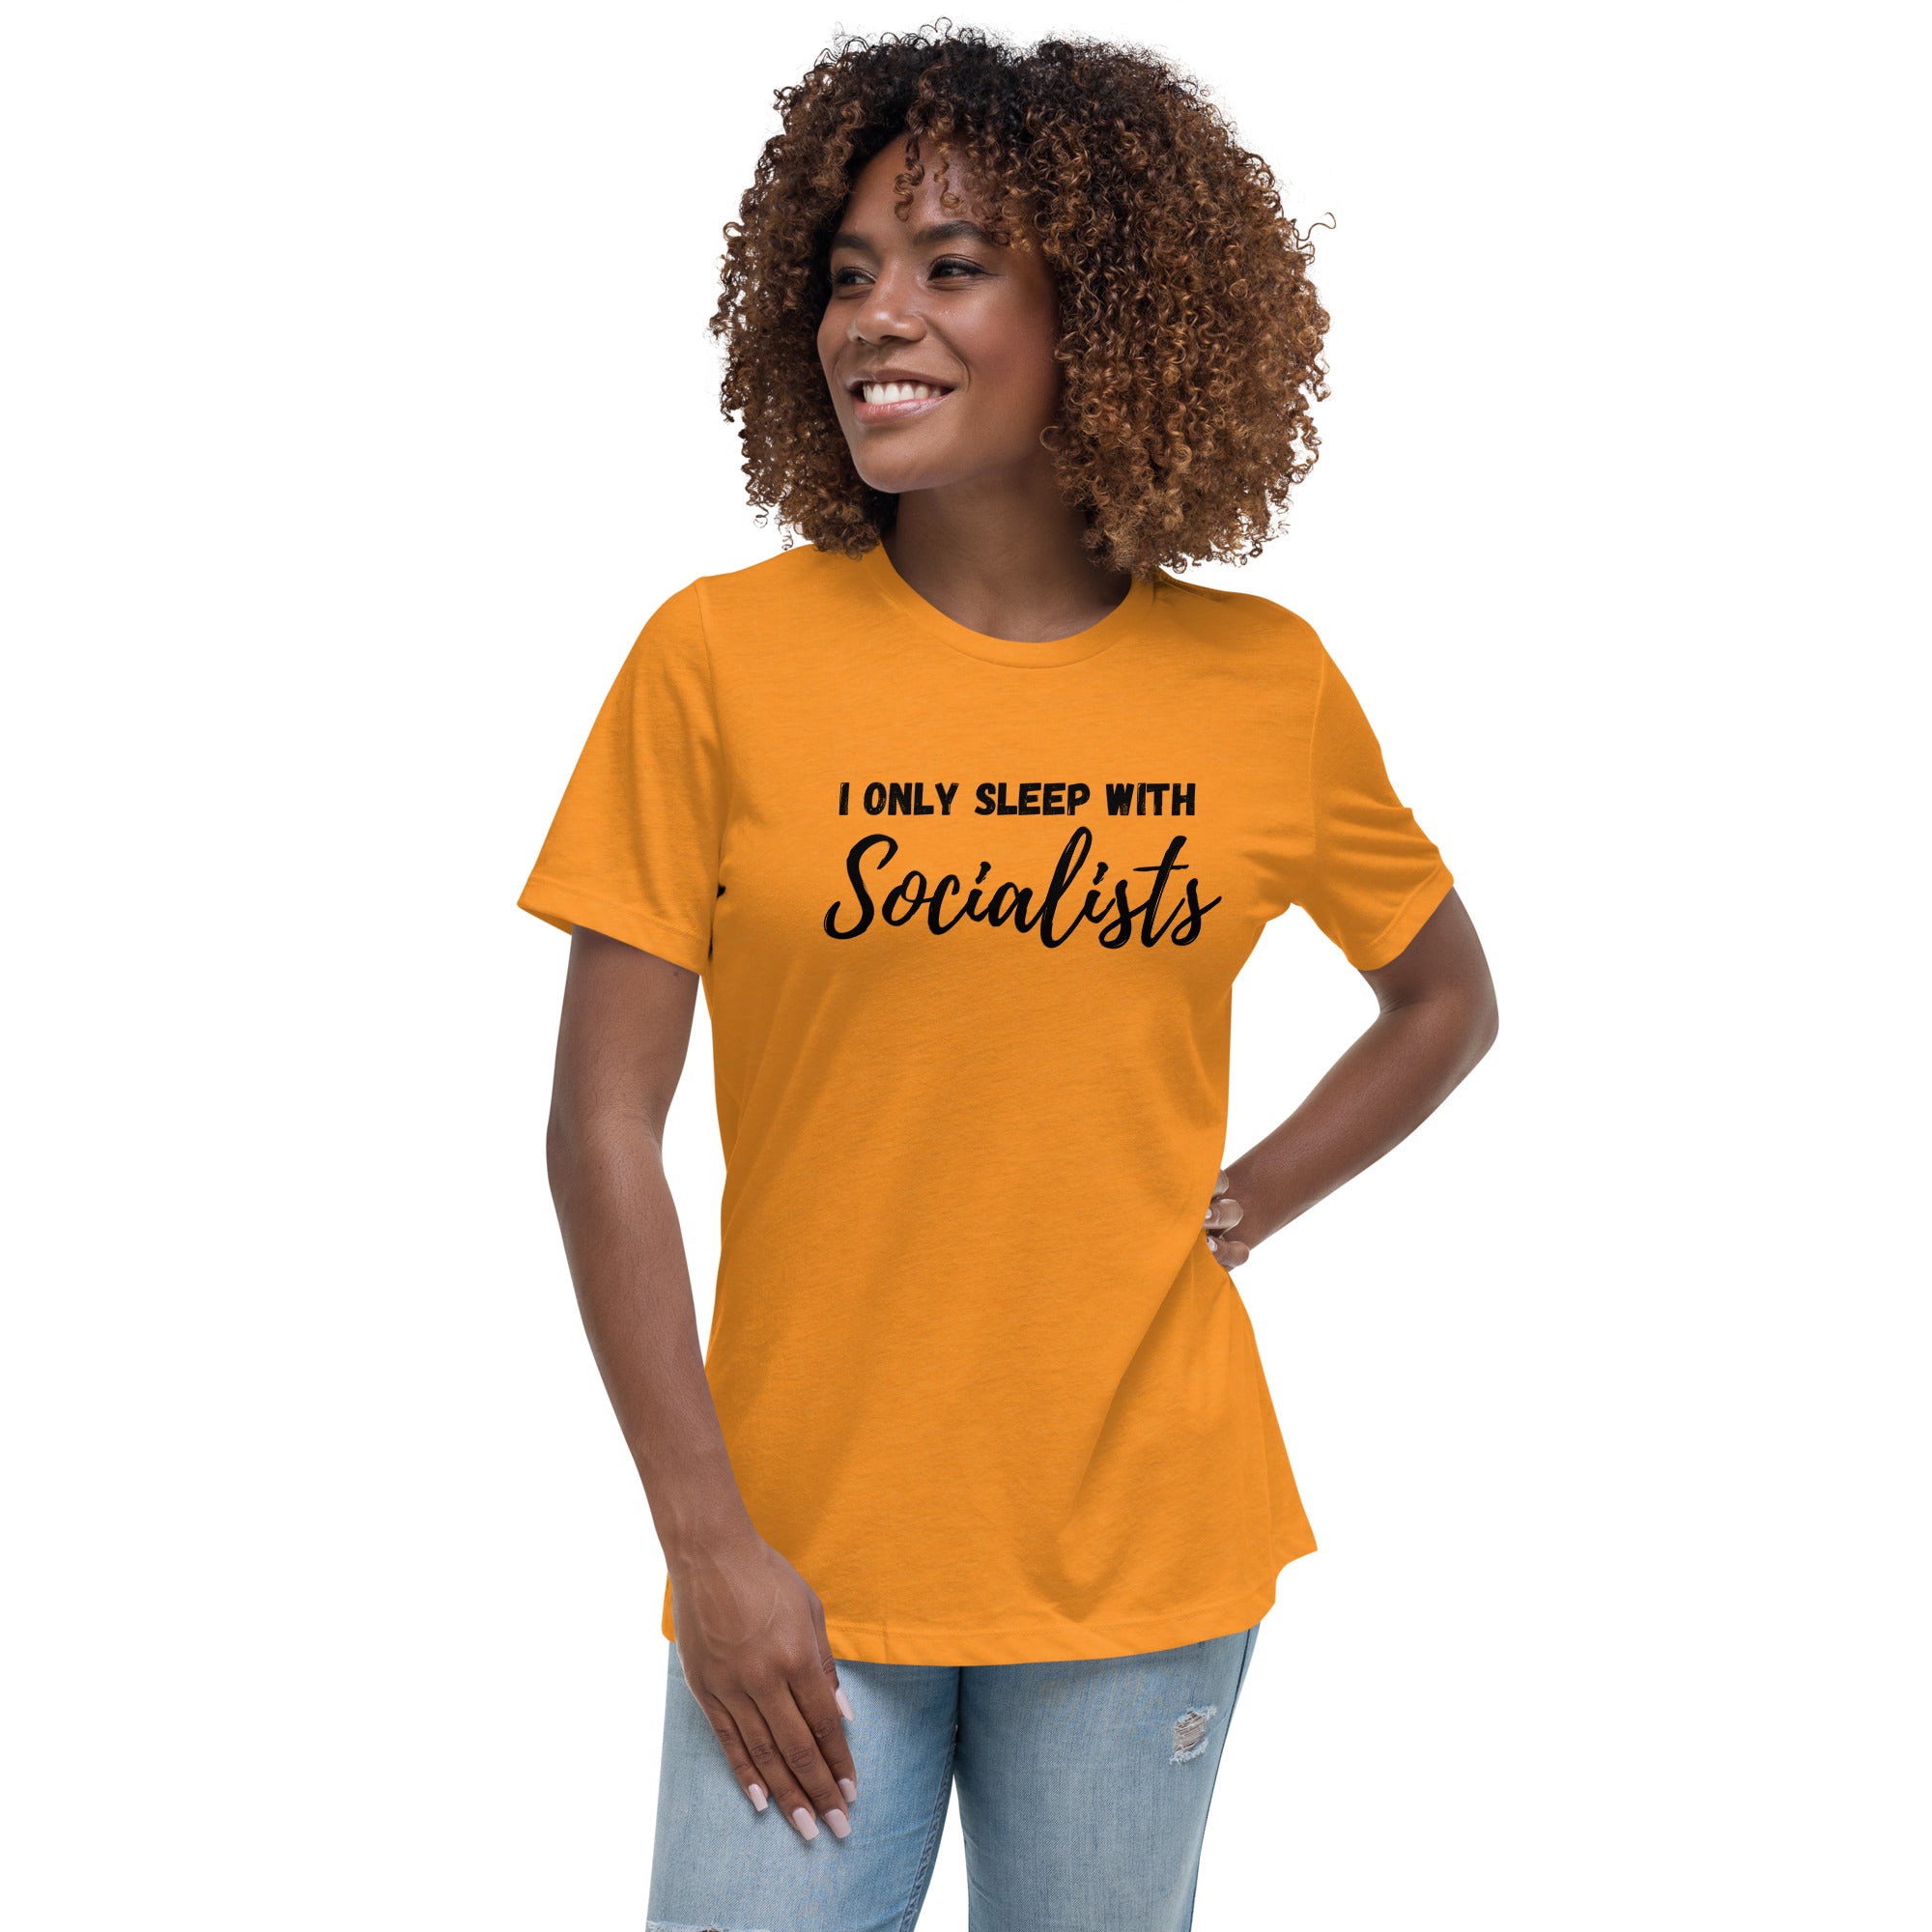 I Only Sleep With Socialists - Women's Relaxed T-Shirt